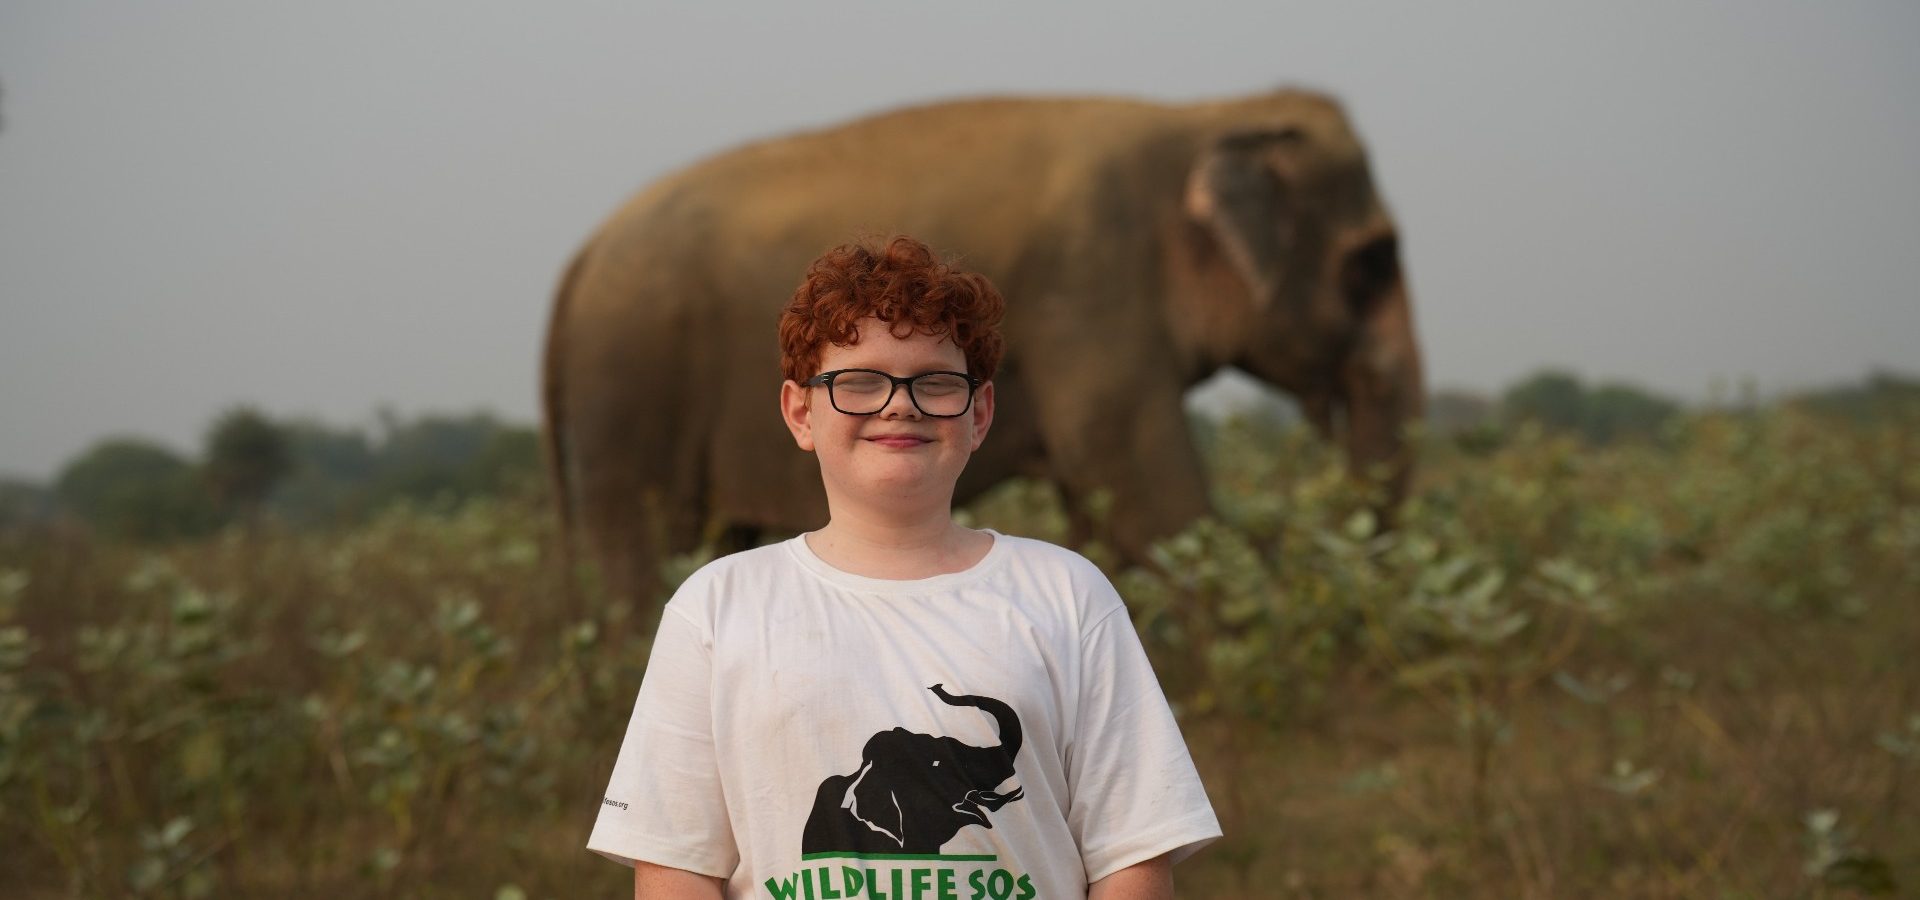 Xavi in the elephant conservation center in India. There is an elephant behind him and is smiling